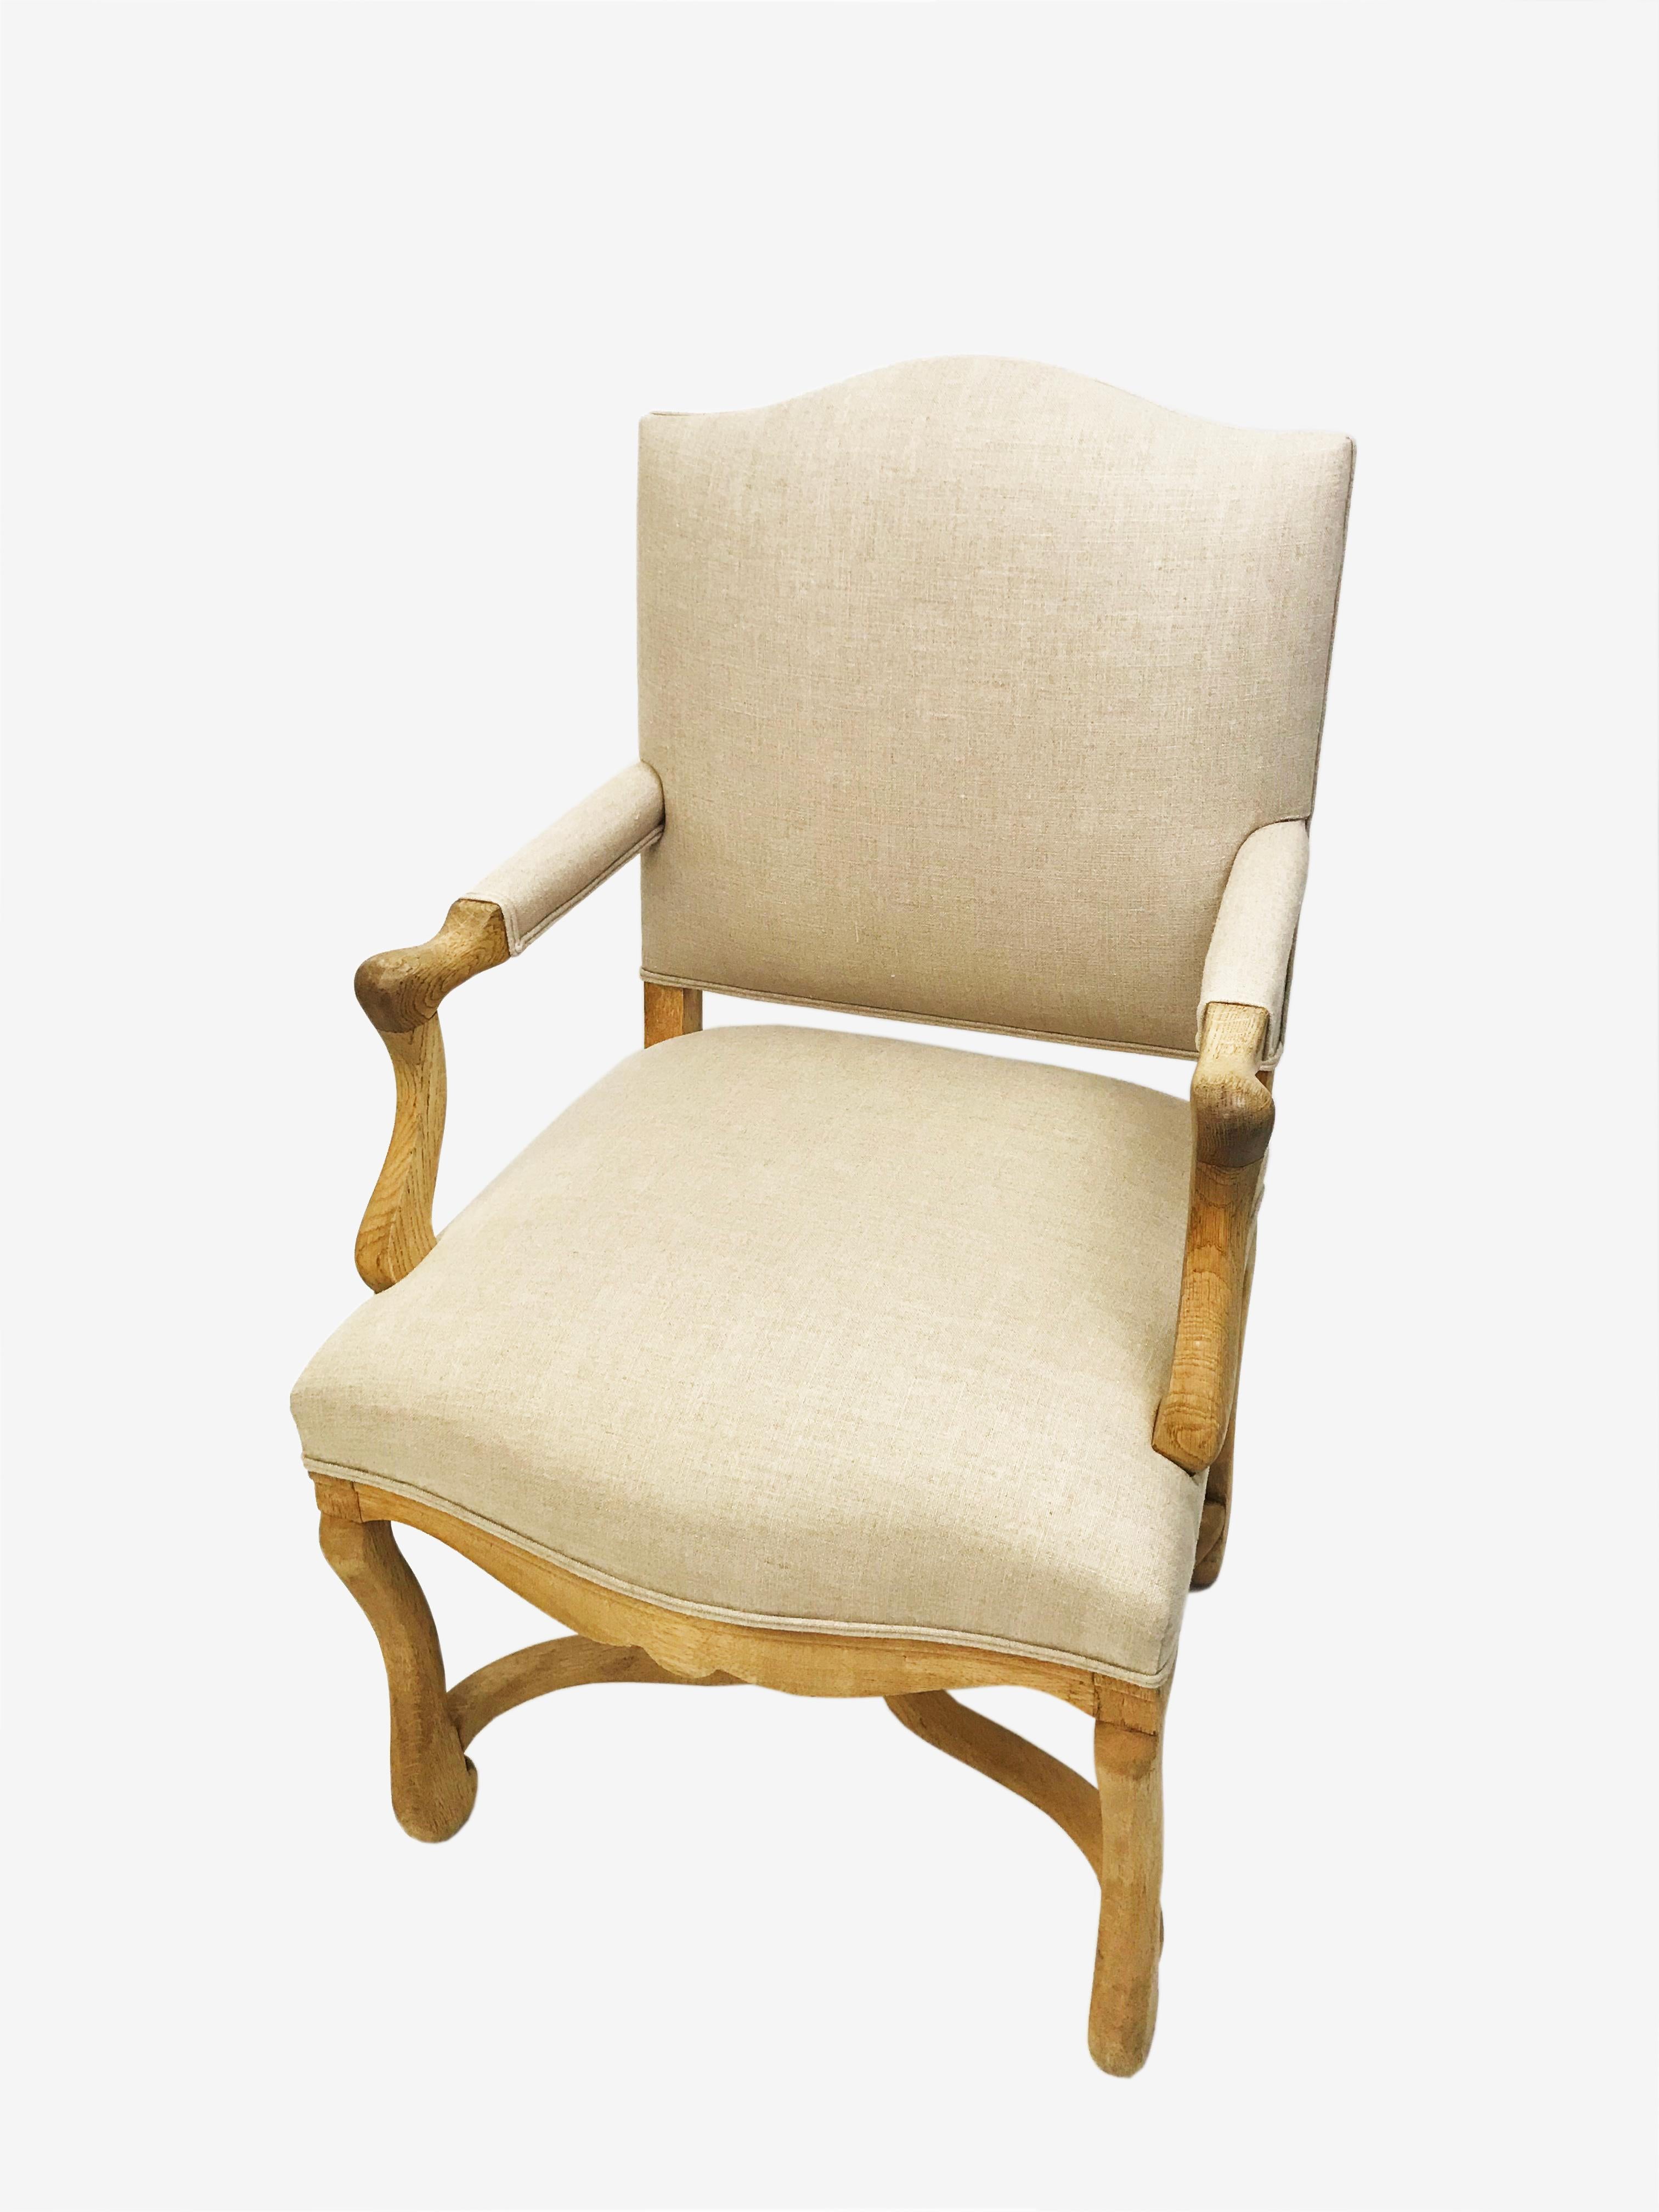 Pair of Os de Mouton chairs in bleached oak circa 1900. Reupholstered in a neutral Belgian linen.

Measures: Height 102cm
Width 54cm
Depth 55cm
Seat height 48cm.